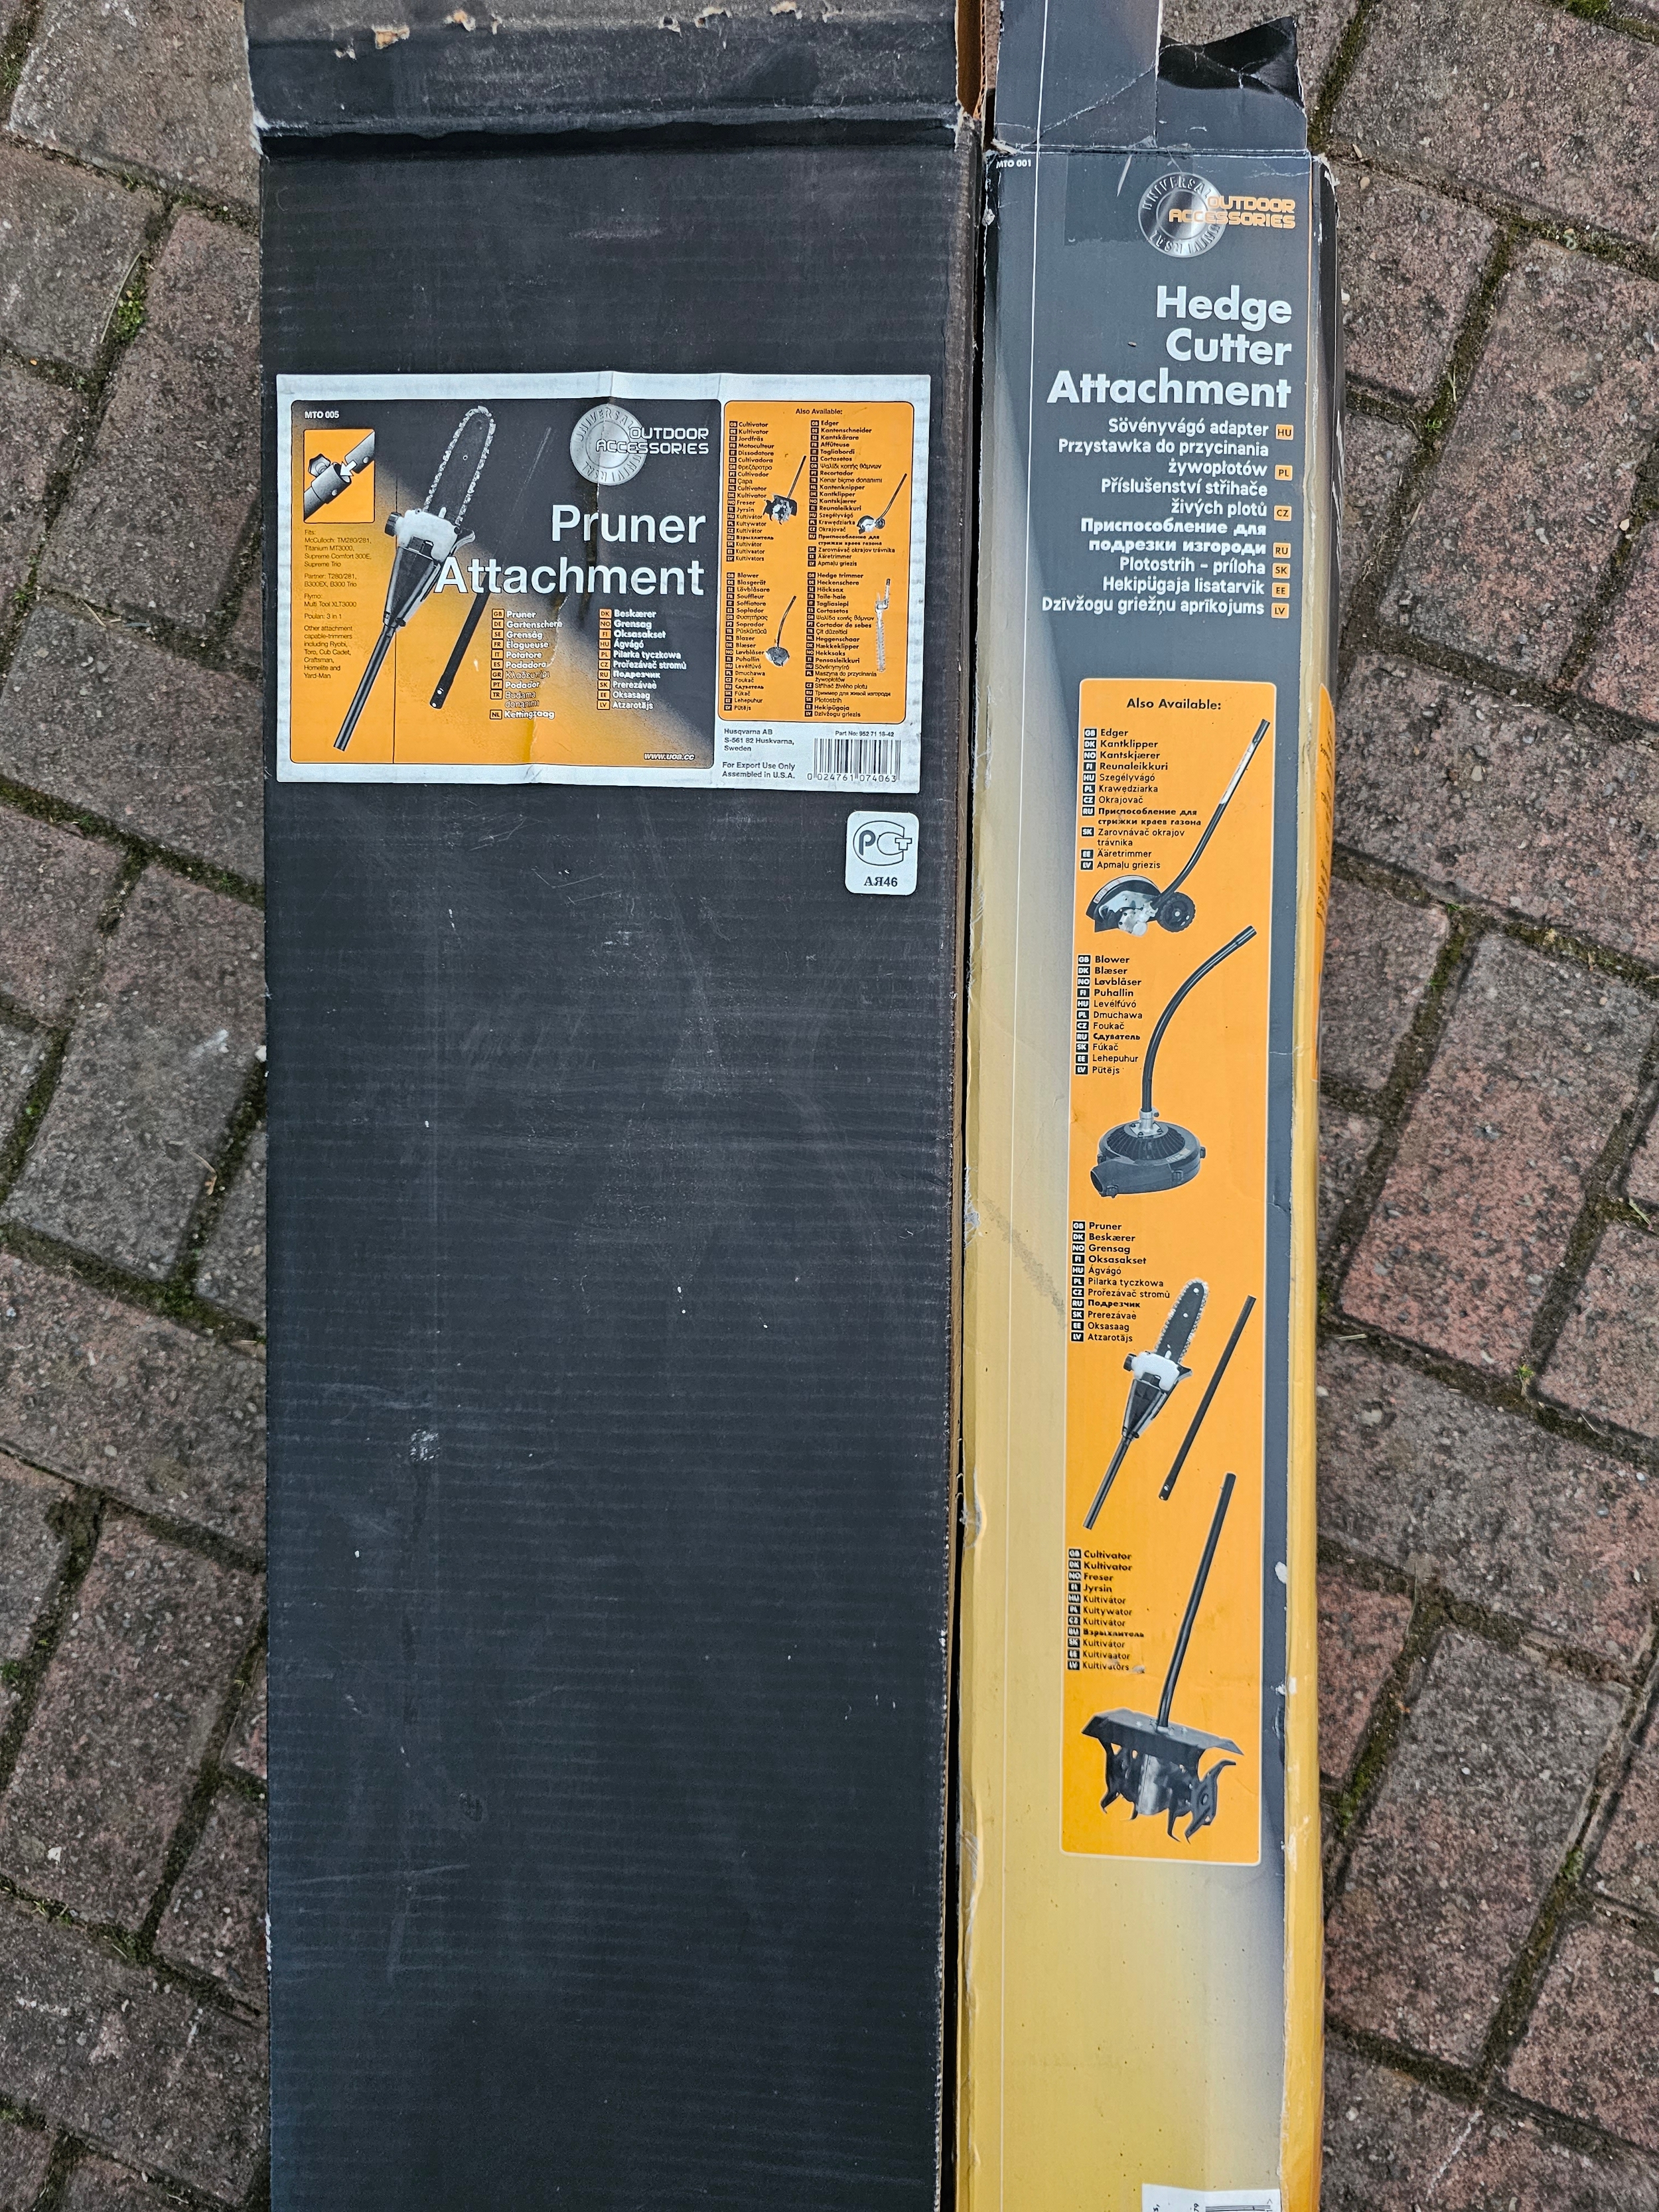 An Outdoor Accessories pruner attachment and a hedge cutter attachment, both unused